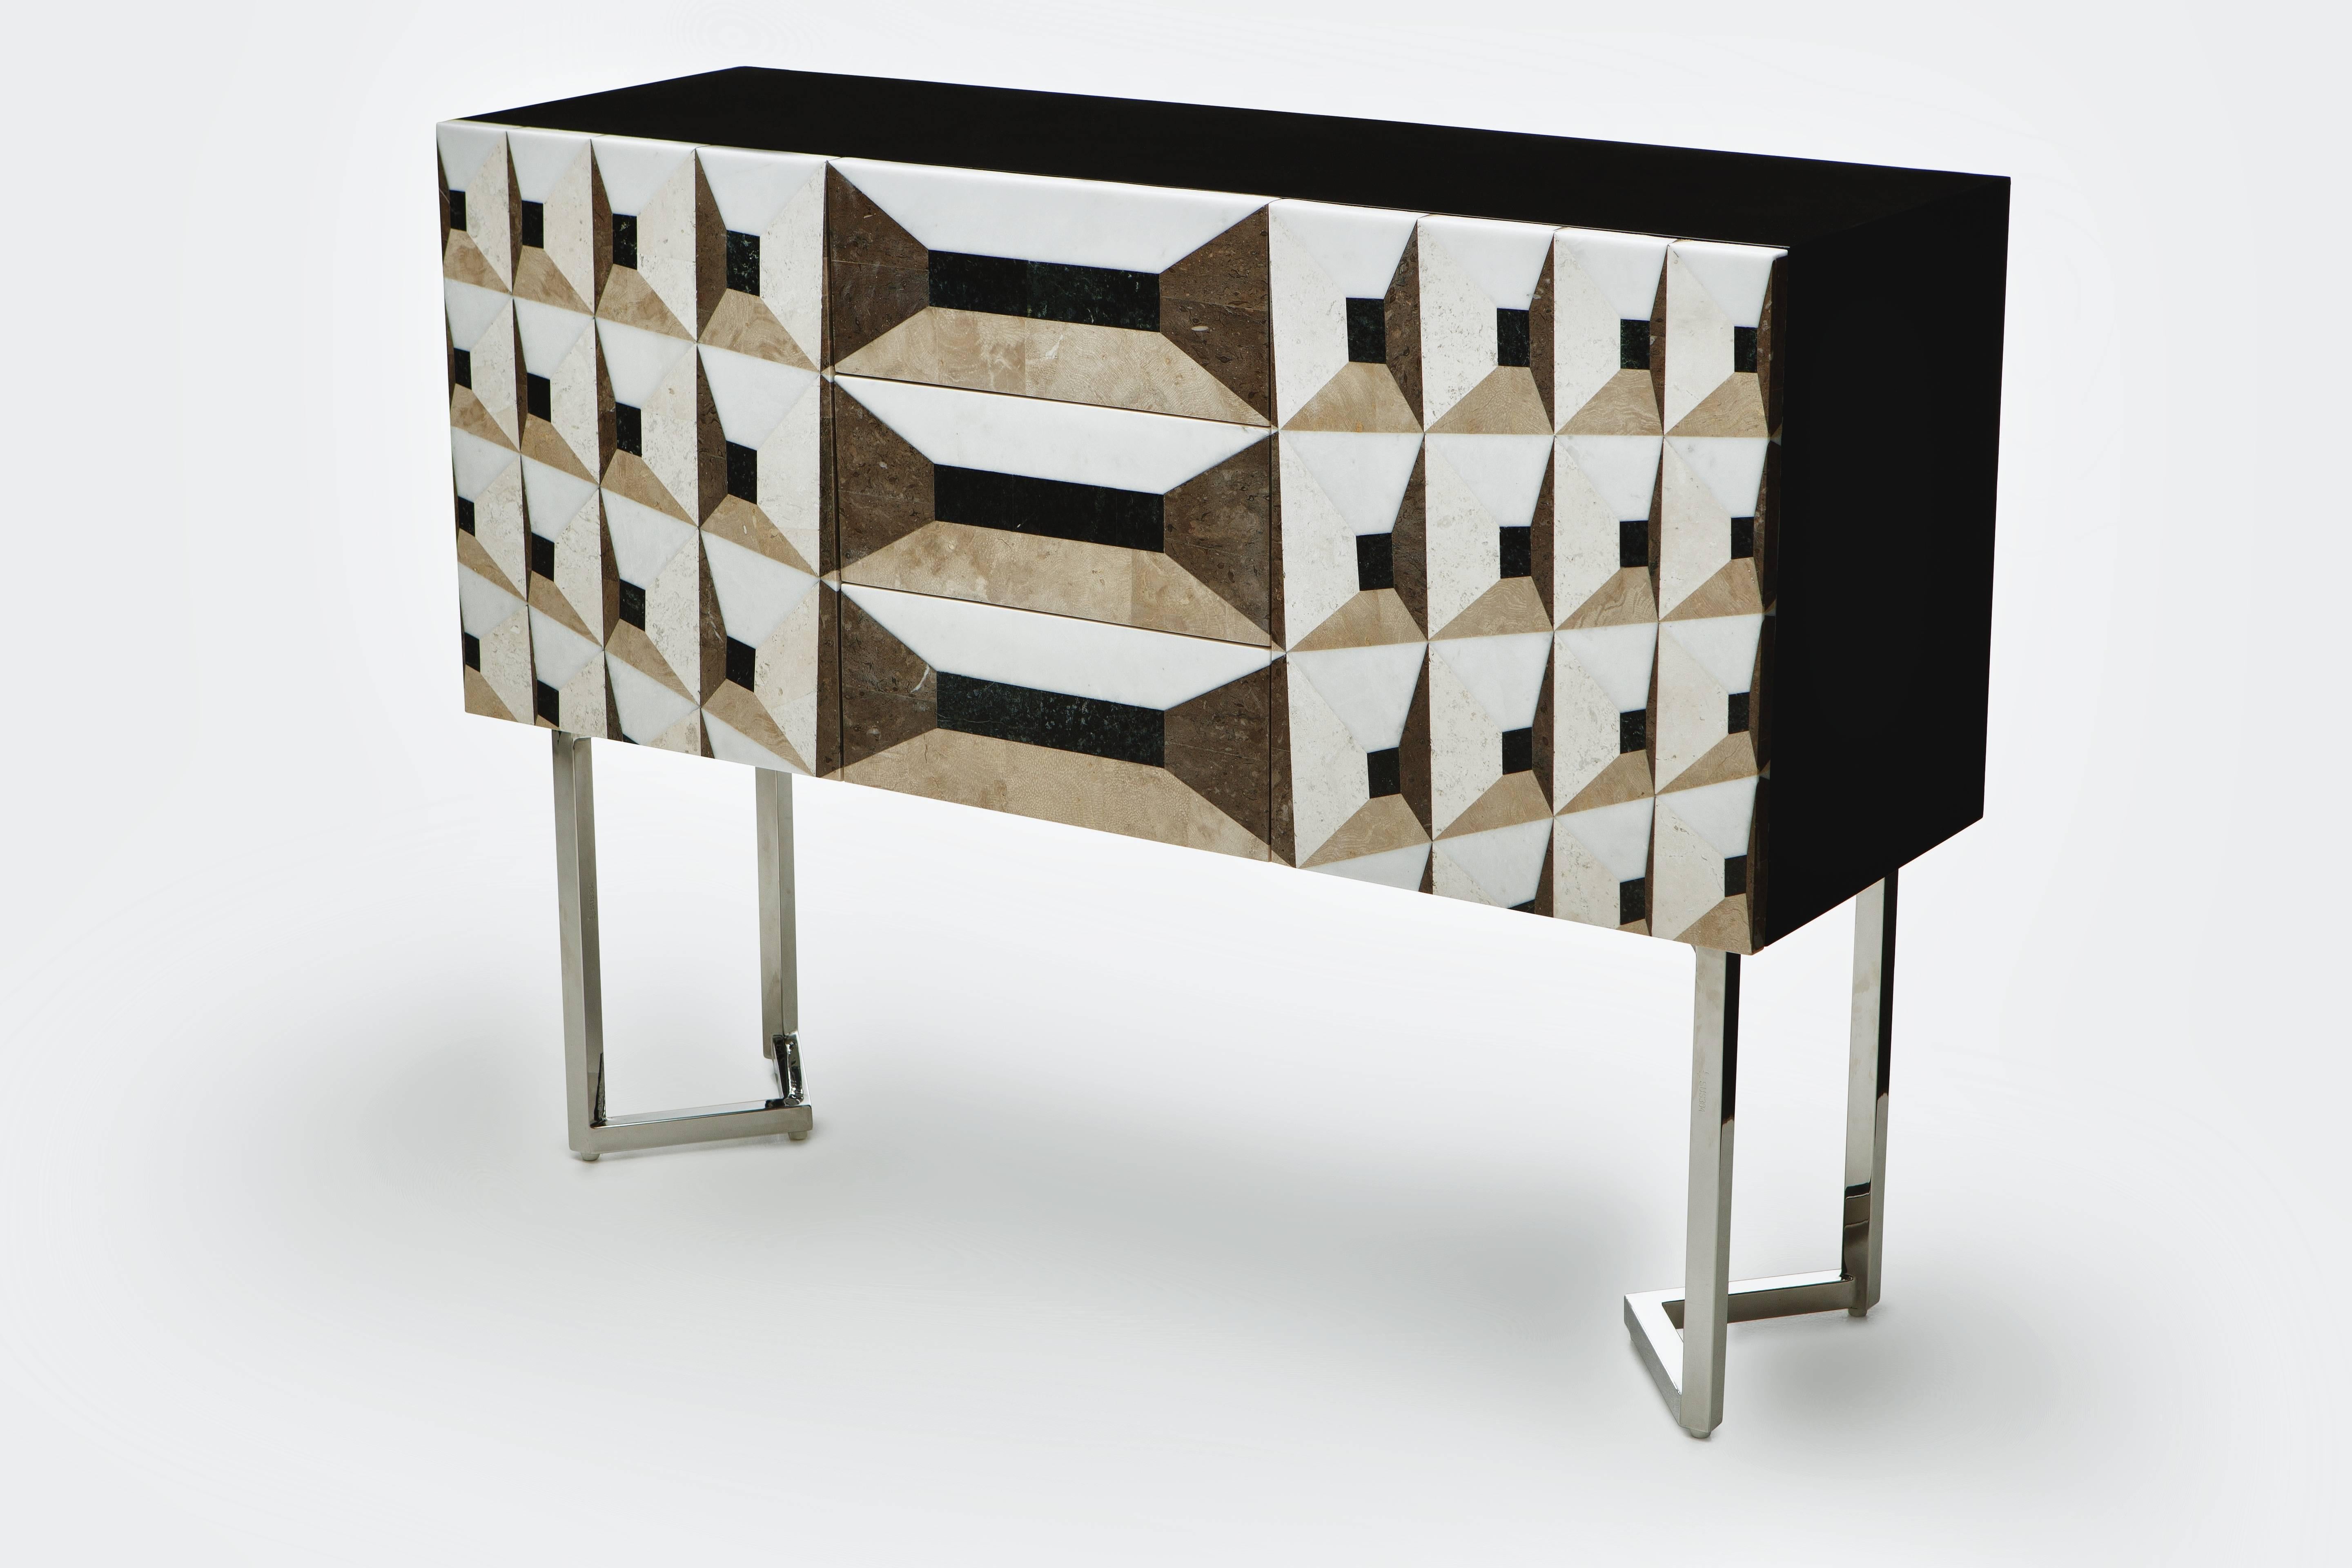 The Midnight gallery sideboard is part of the ‘Moonlight’ collection and enjoys a façade of pure, chiselled lines, acute angles and raw clarity. The geometric trompe-l’oeil executed in noble marble marquetry technique, comprehensive perspective and